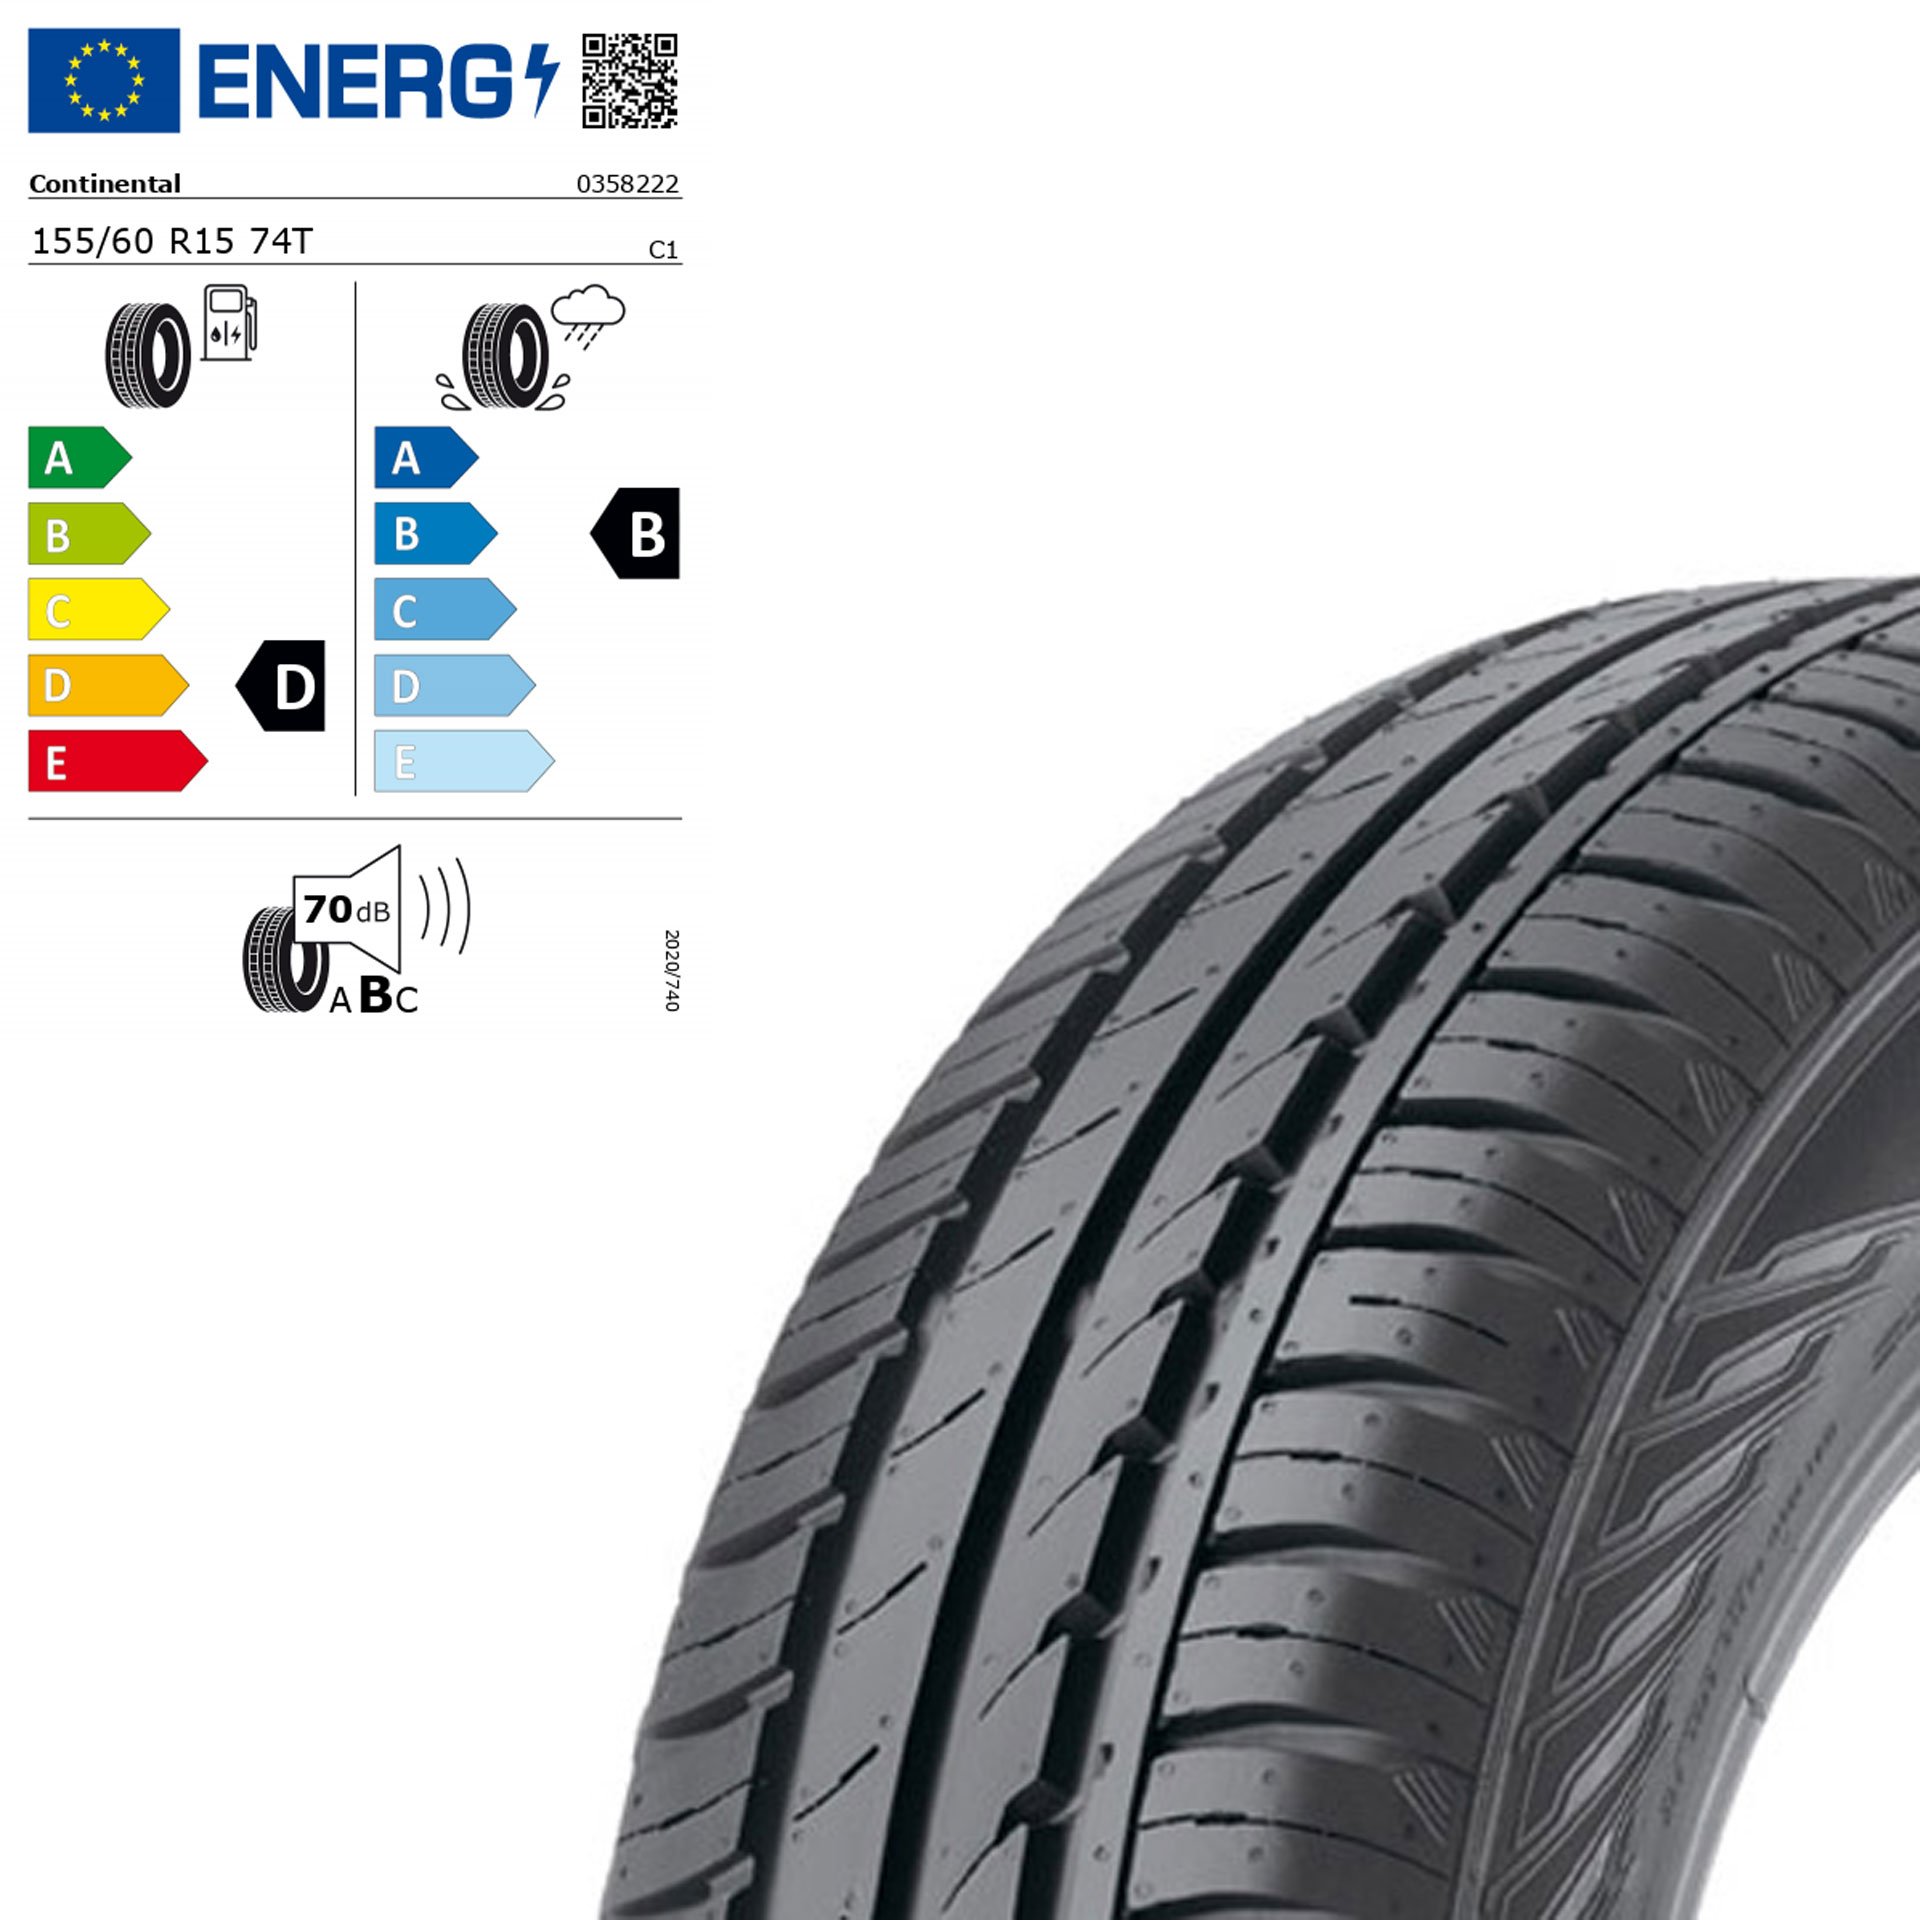 155/60 R15 74T Continental ContiEcoContact 3 - Sommerreifen Q44003111013A